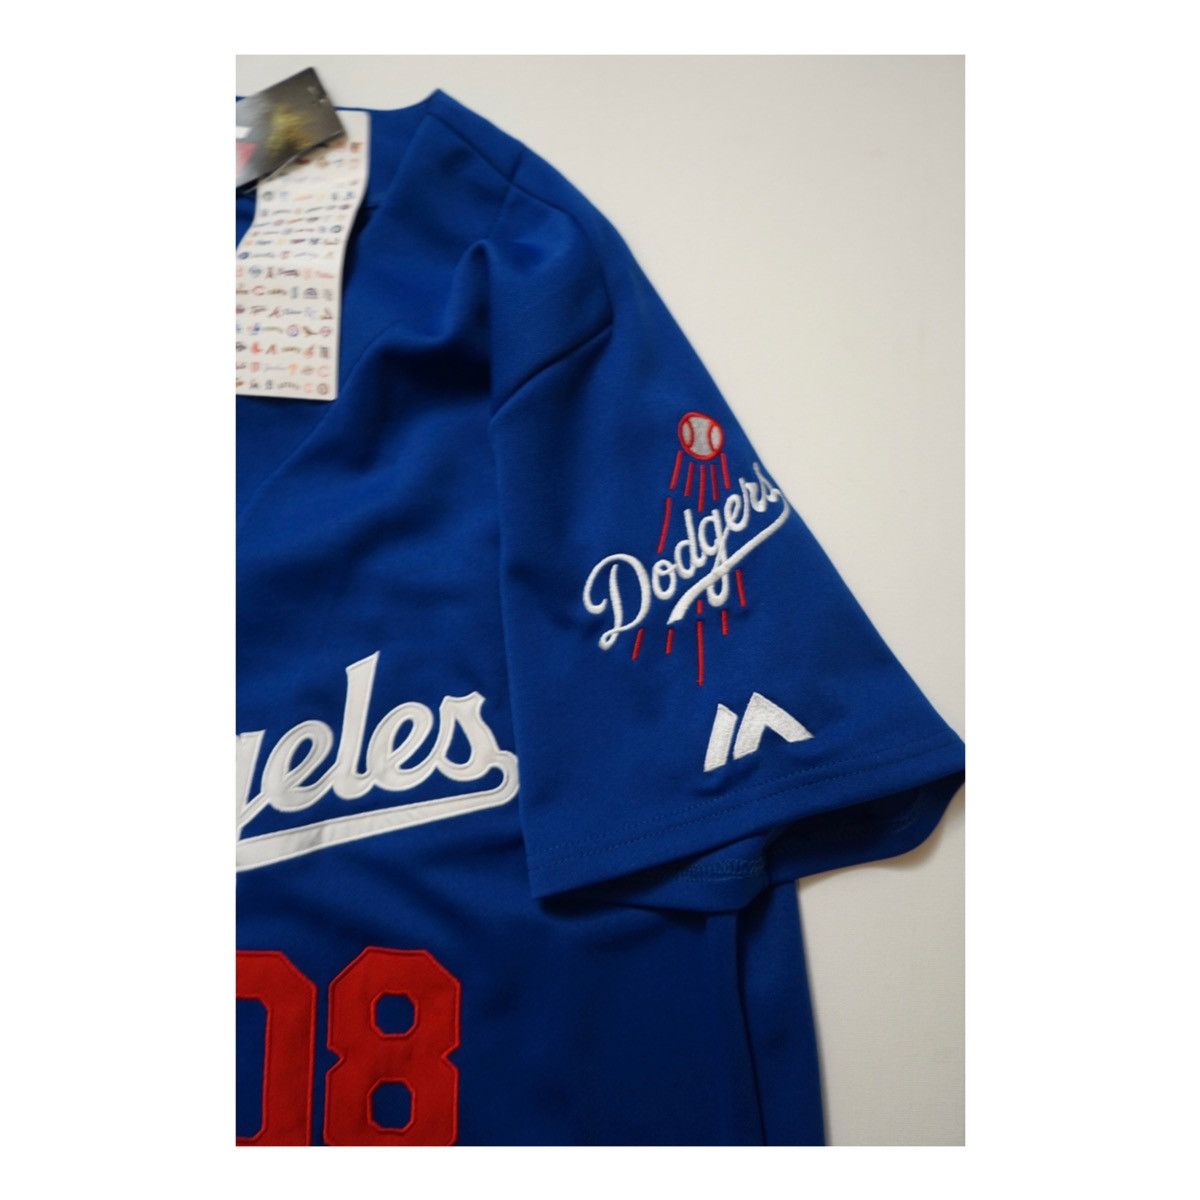 Pink Dolphin x Los Angeles Dodgers Majestic Baseball Jersey Men Size Small  RARE